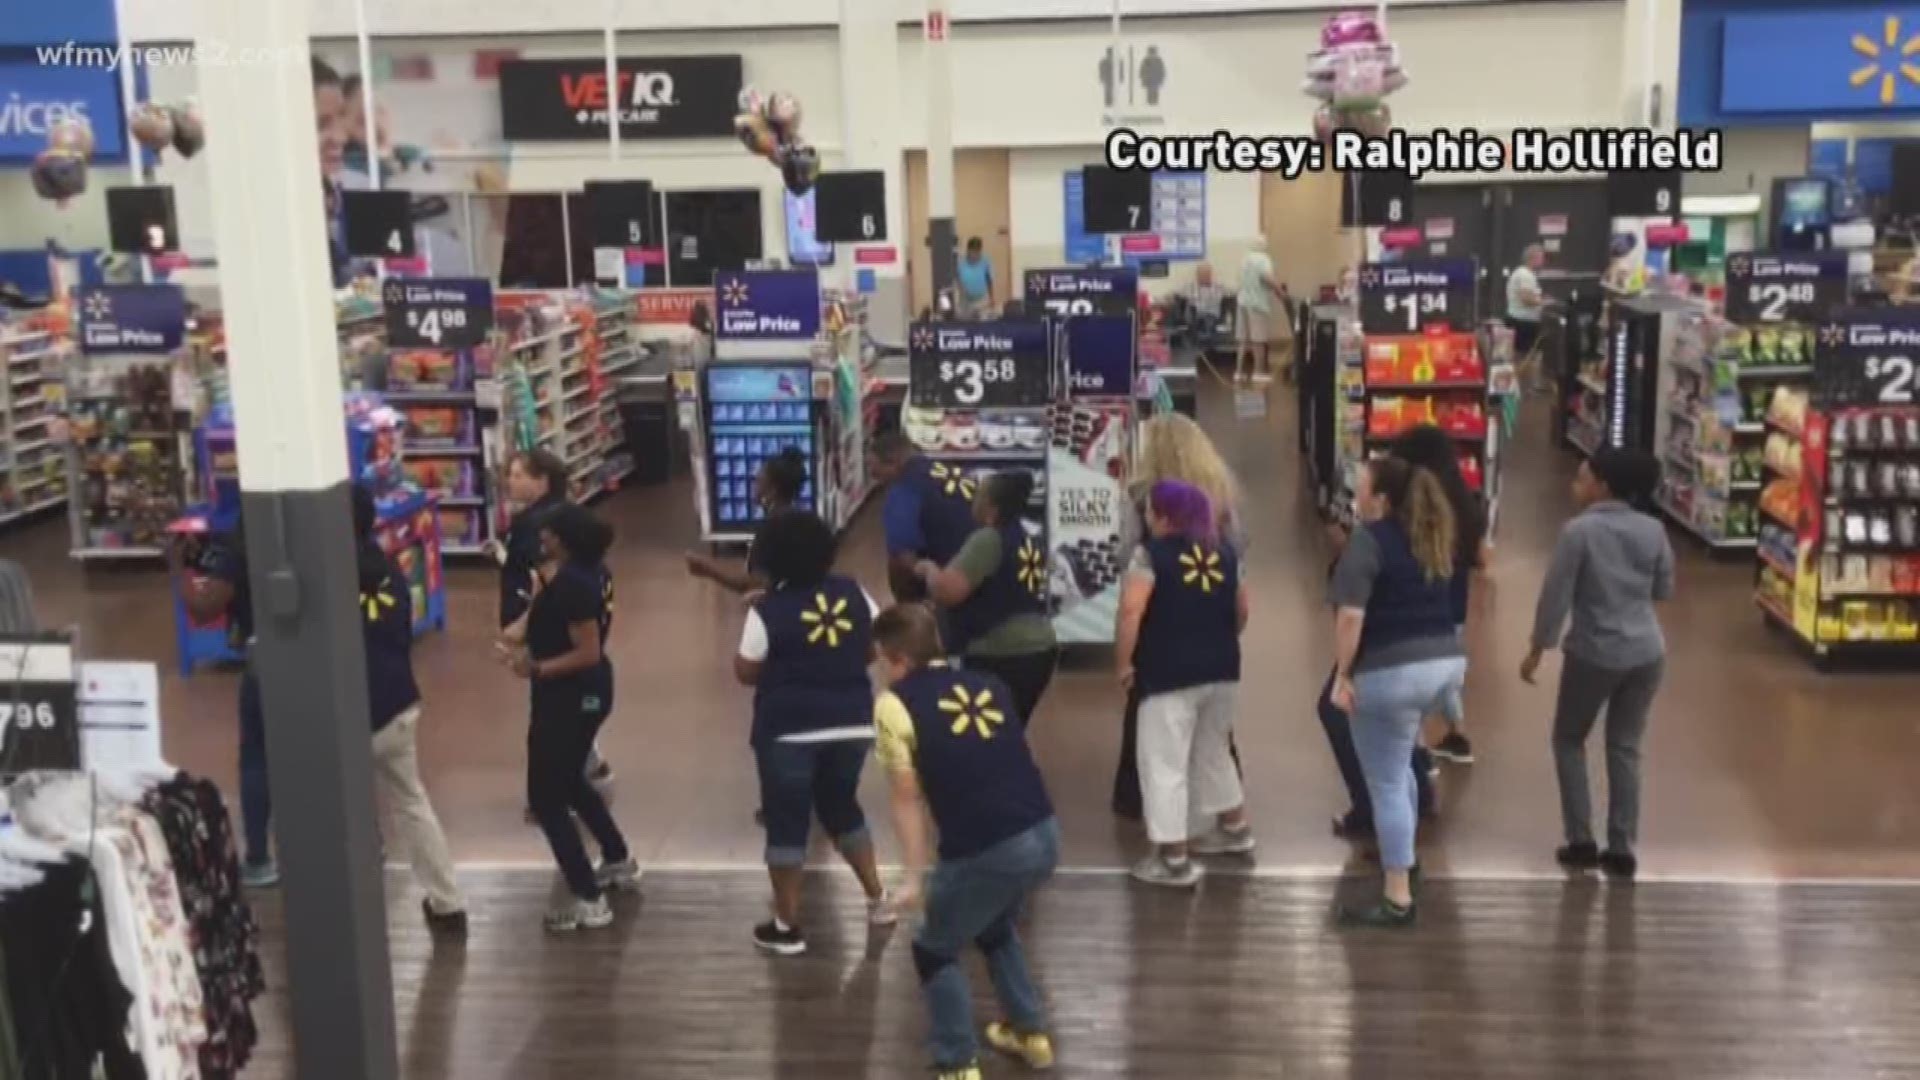 Walmart News: The Latest Viral News From the Retailer